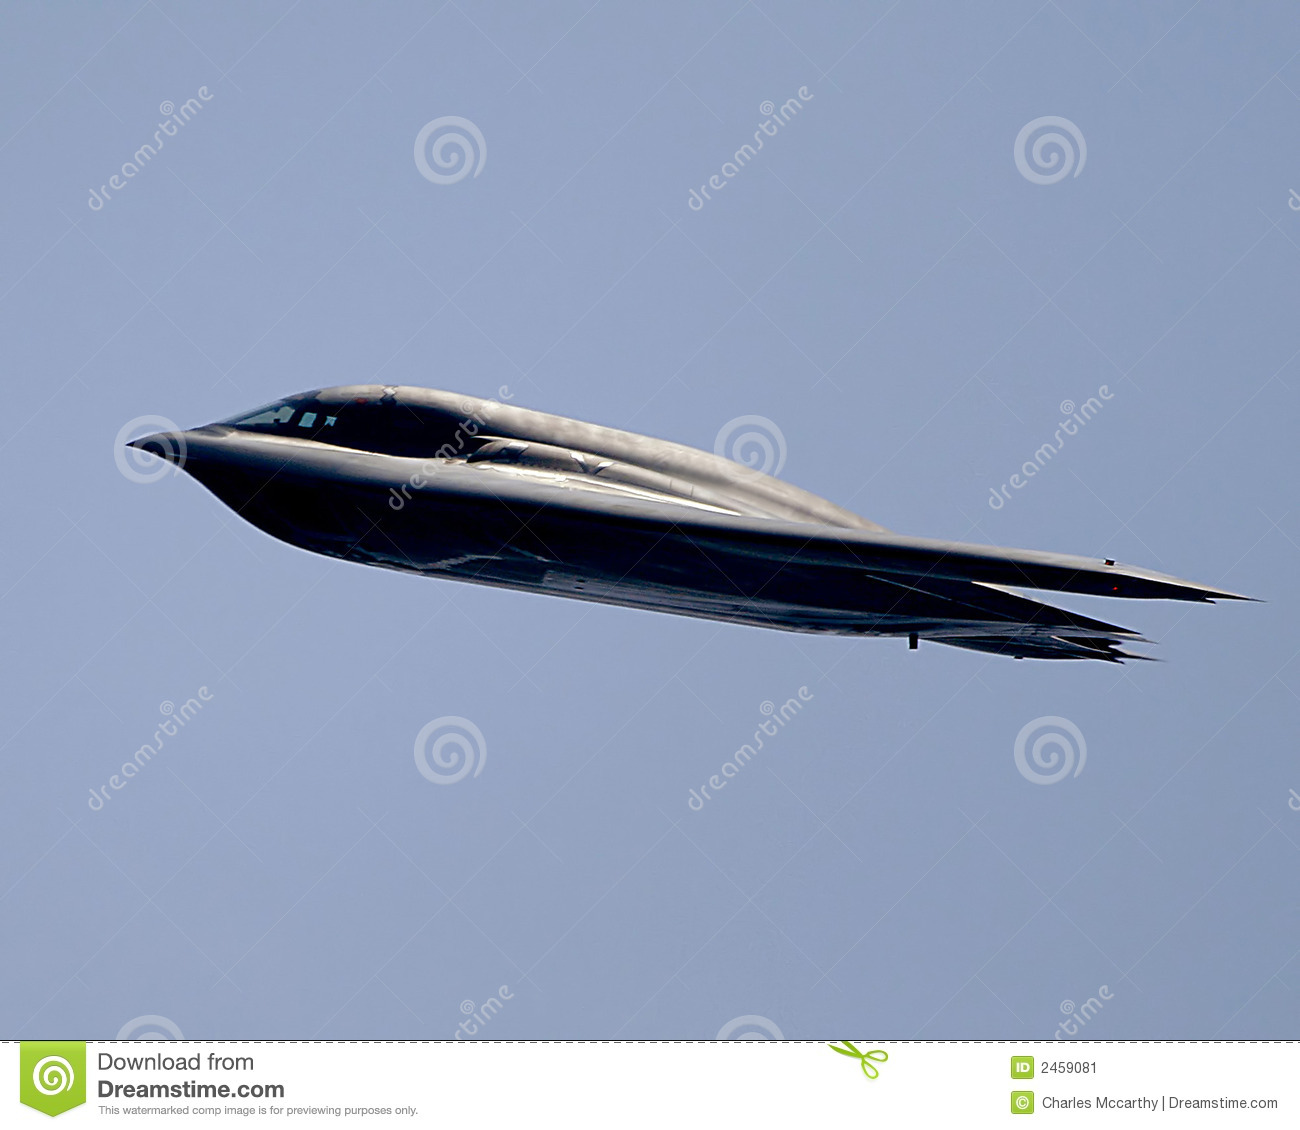 More Similar Stock Images Of   B2 Stealth Bomber In Flight  